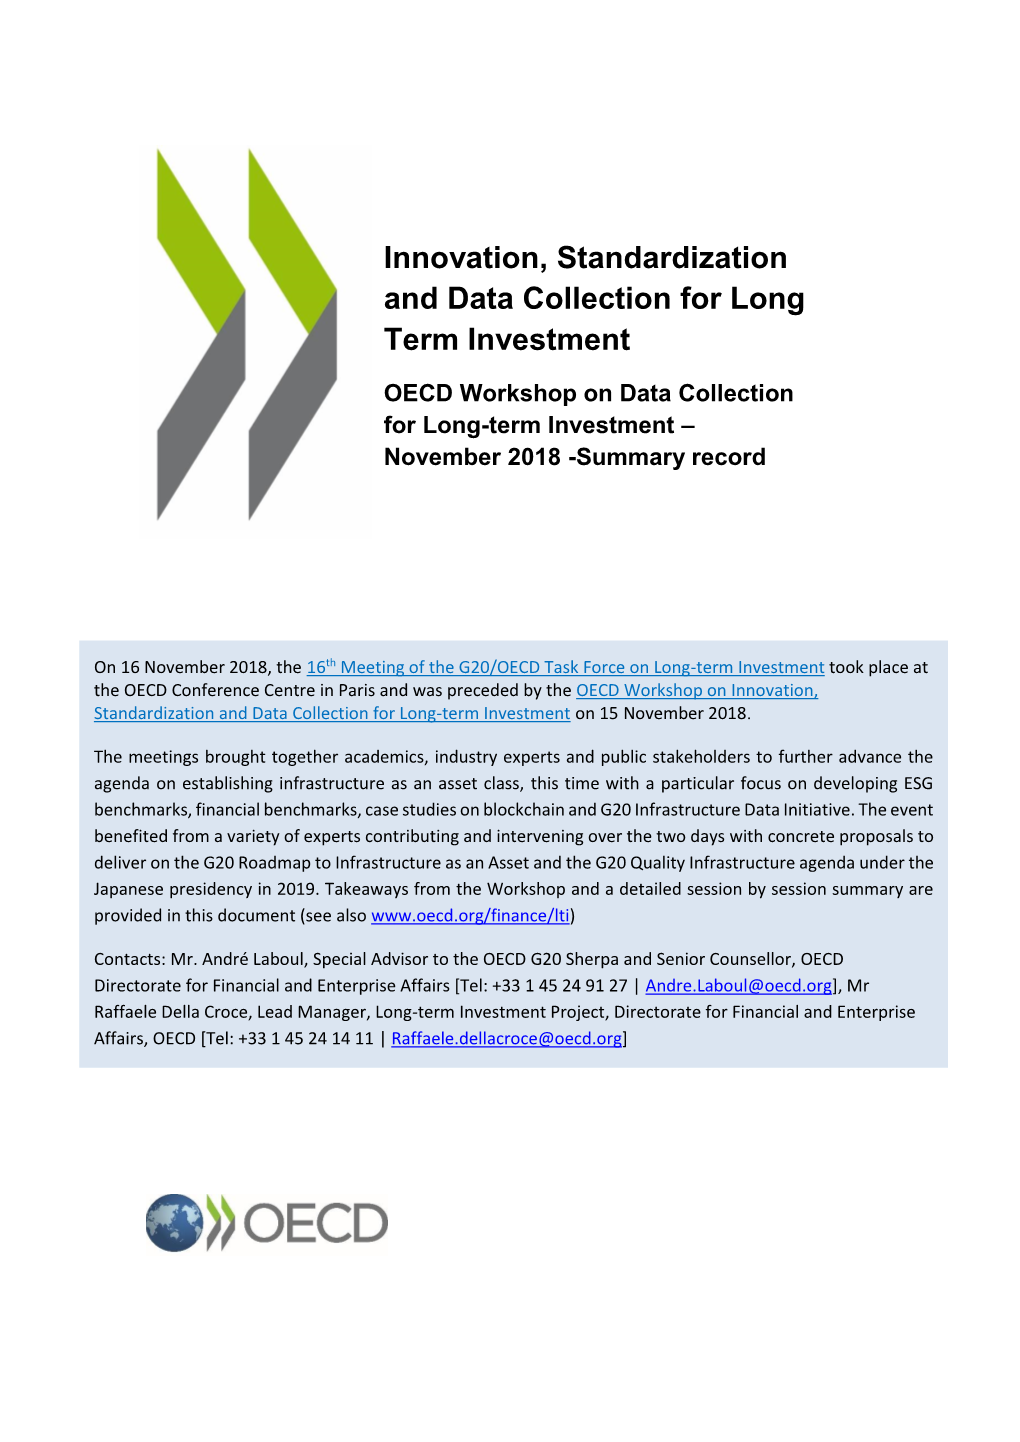 Innovation, Standardization and Data Collection for Long Term Investment